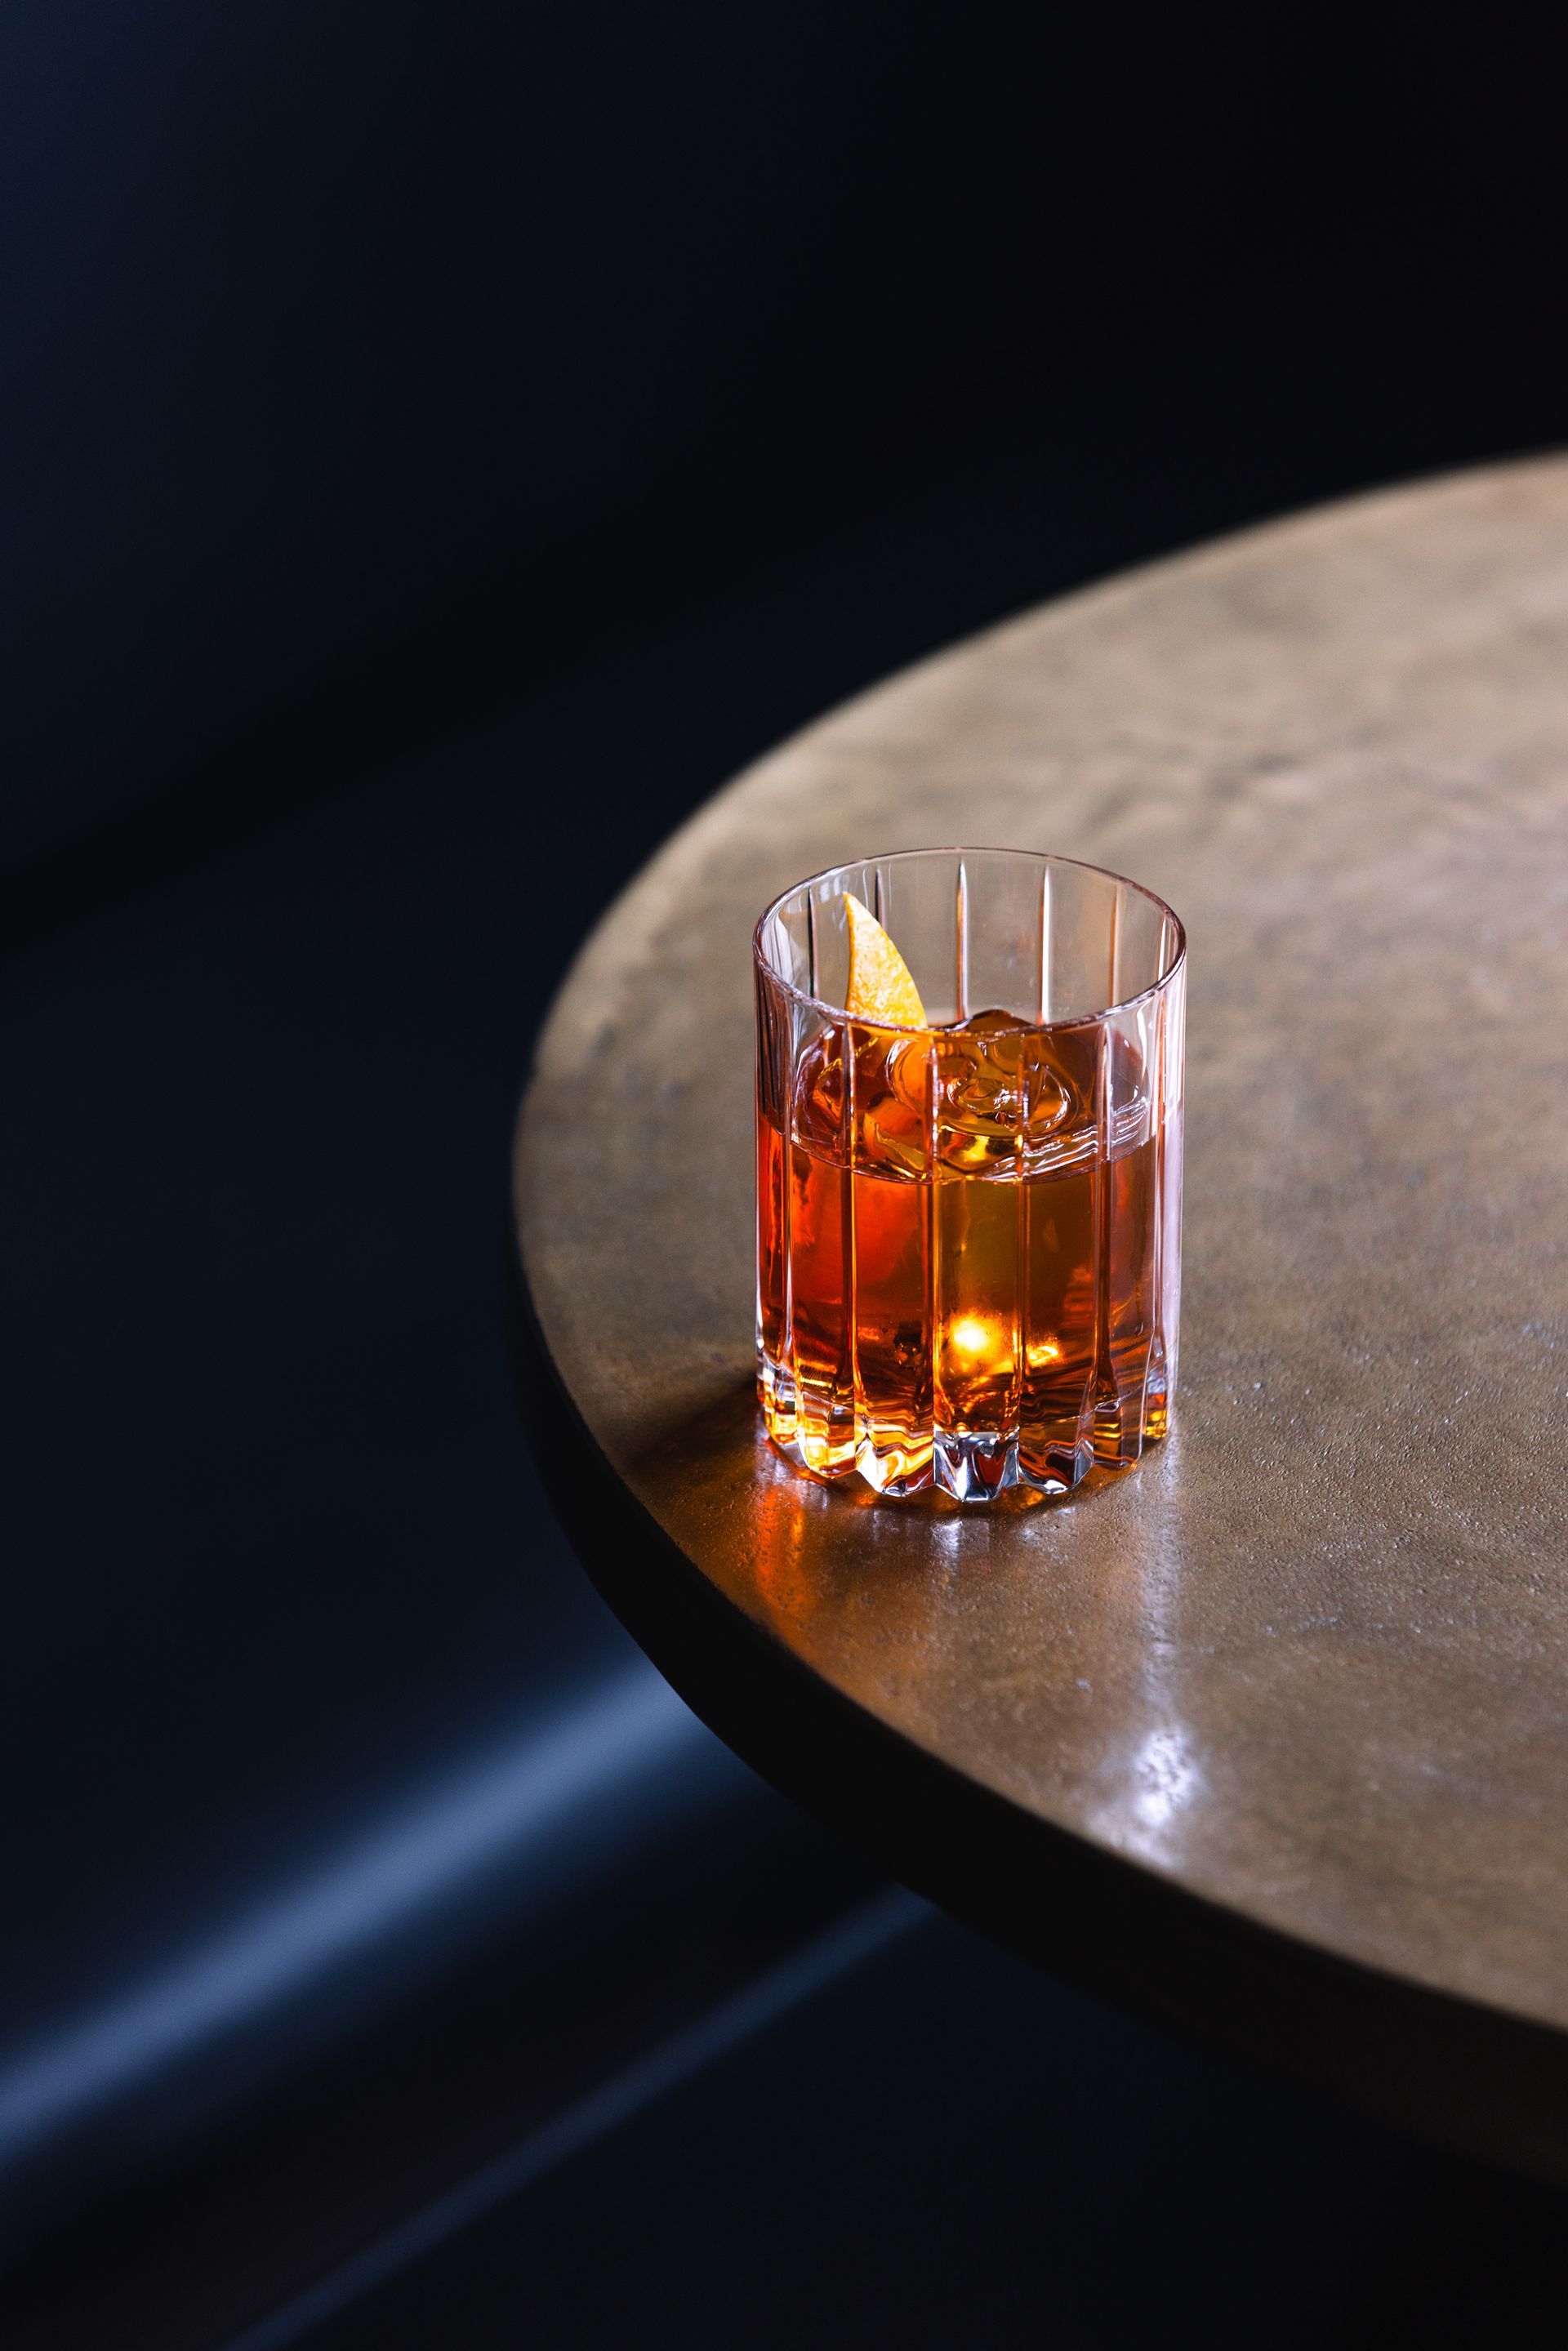 A close up of a glass of whiskey on a table.